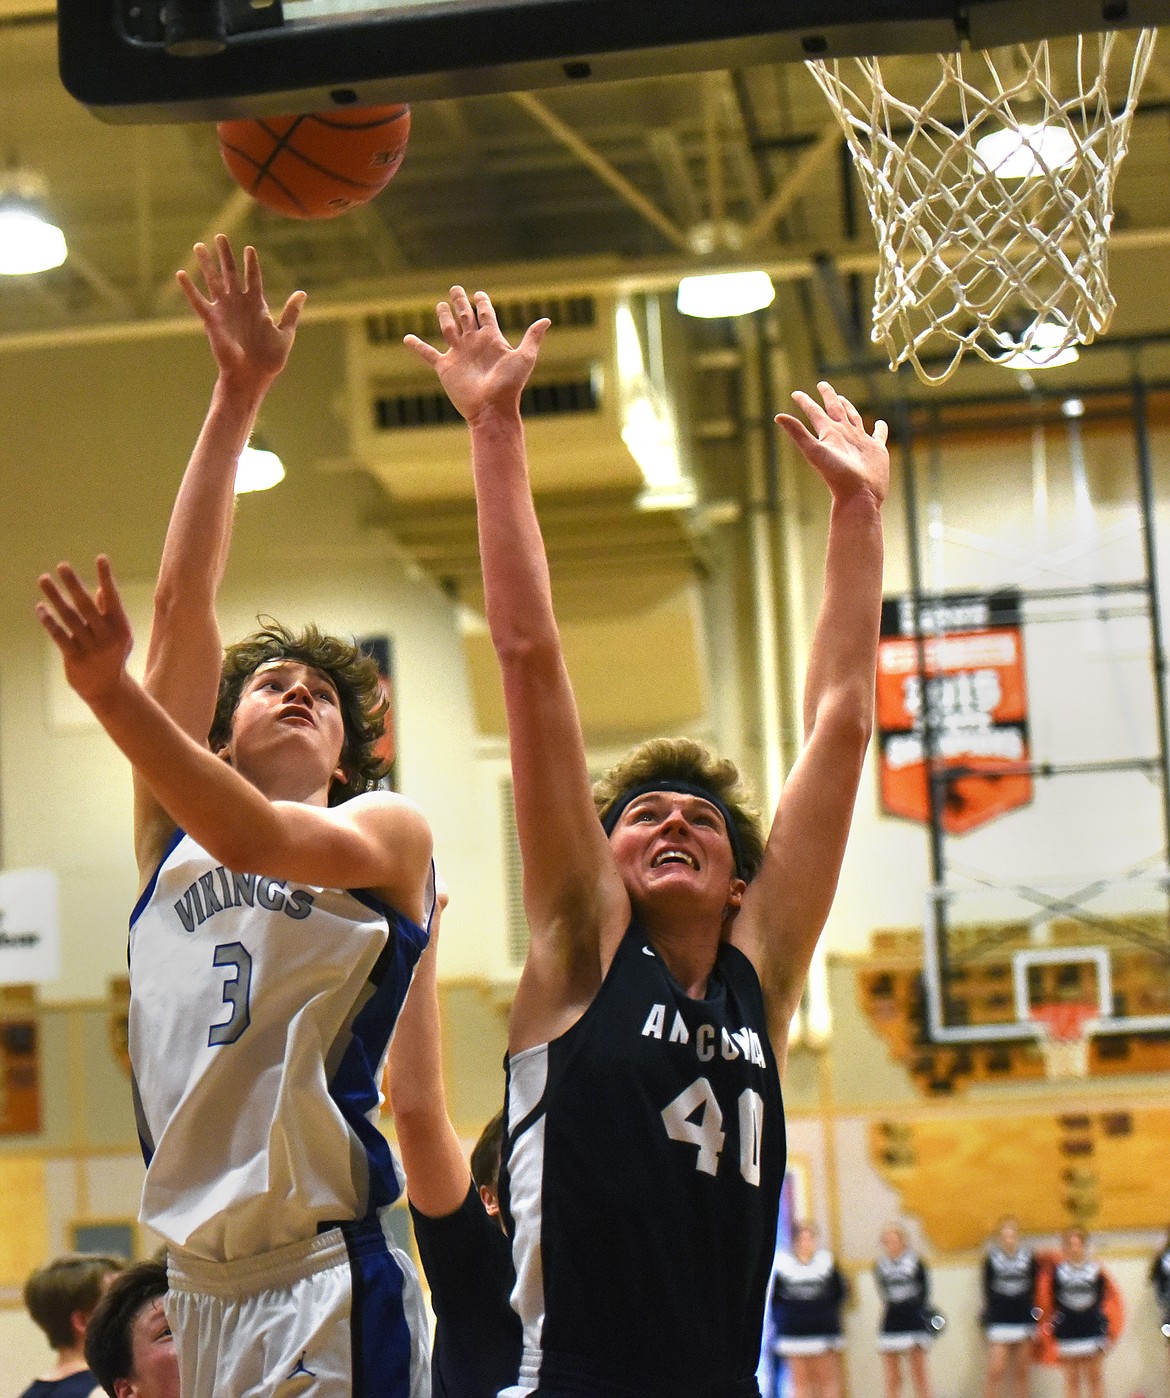 Bigfork's Isak Epperly puts in a shot over Anaconda's Landon Hurley during play at the Western B Divisional Basketball Tournament in Eureka Thursday. (Jeremy Weber/Daily Inter Lake)